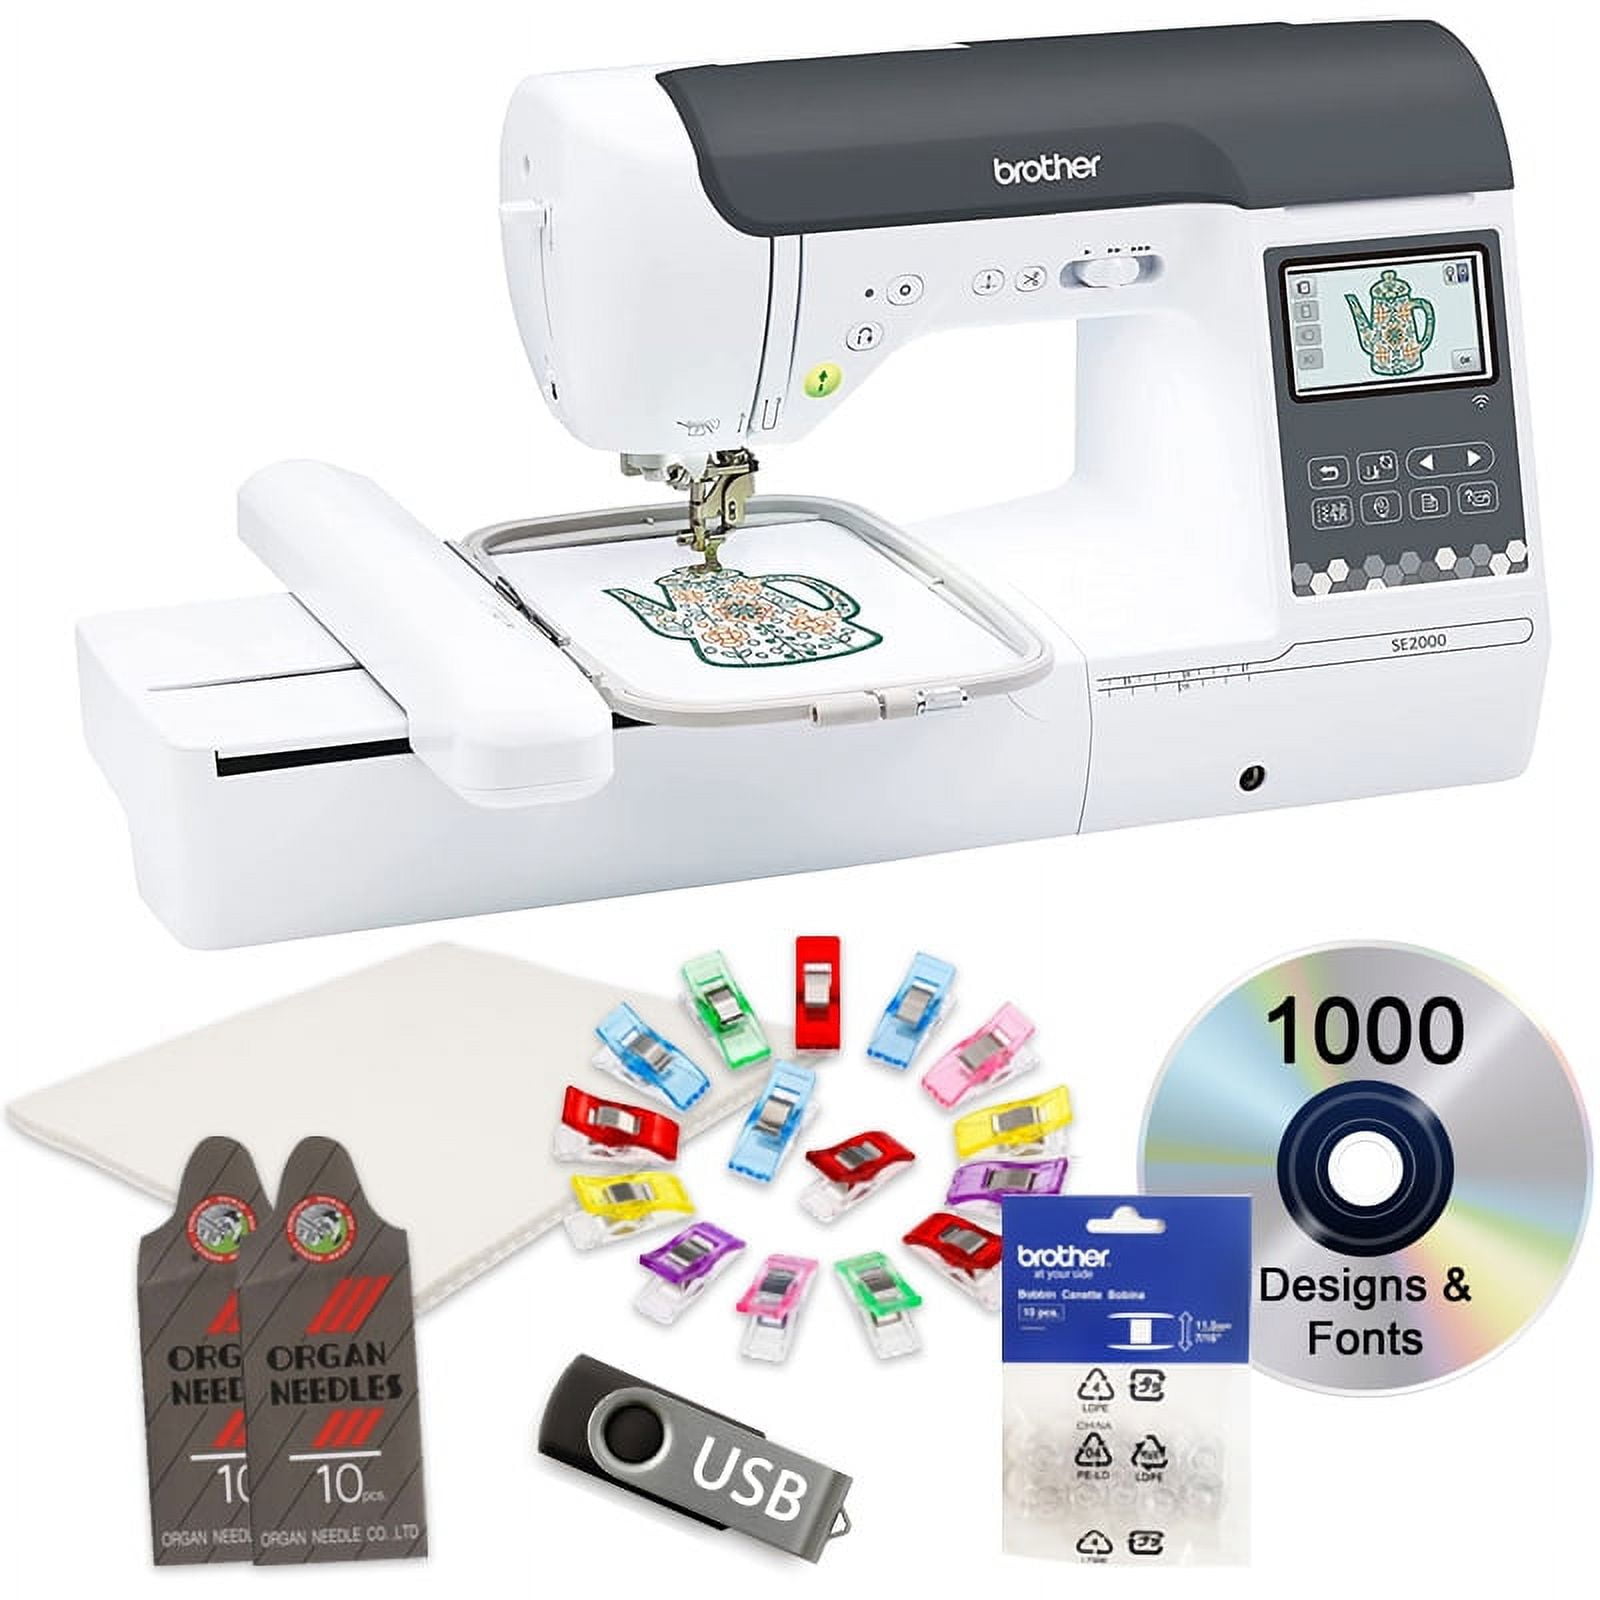 Brother SE700 Sewing and Embroidery Machine, 4x 4 Hoop & 8 Feet